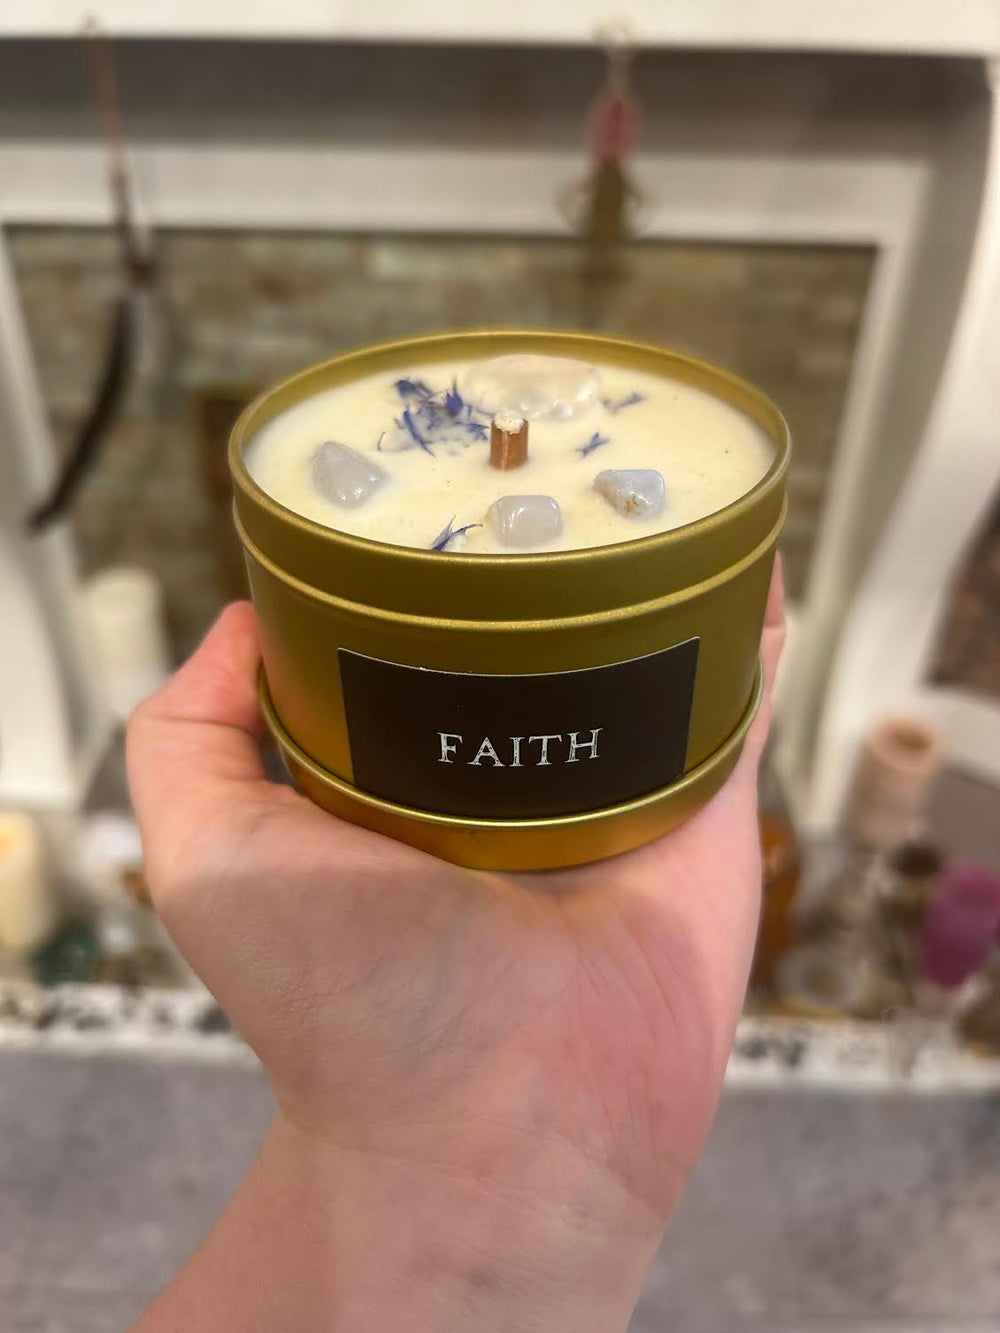 This is the front of the Faith candle